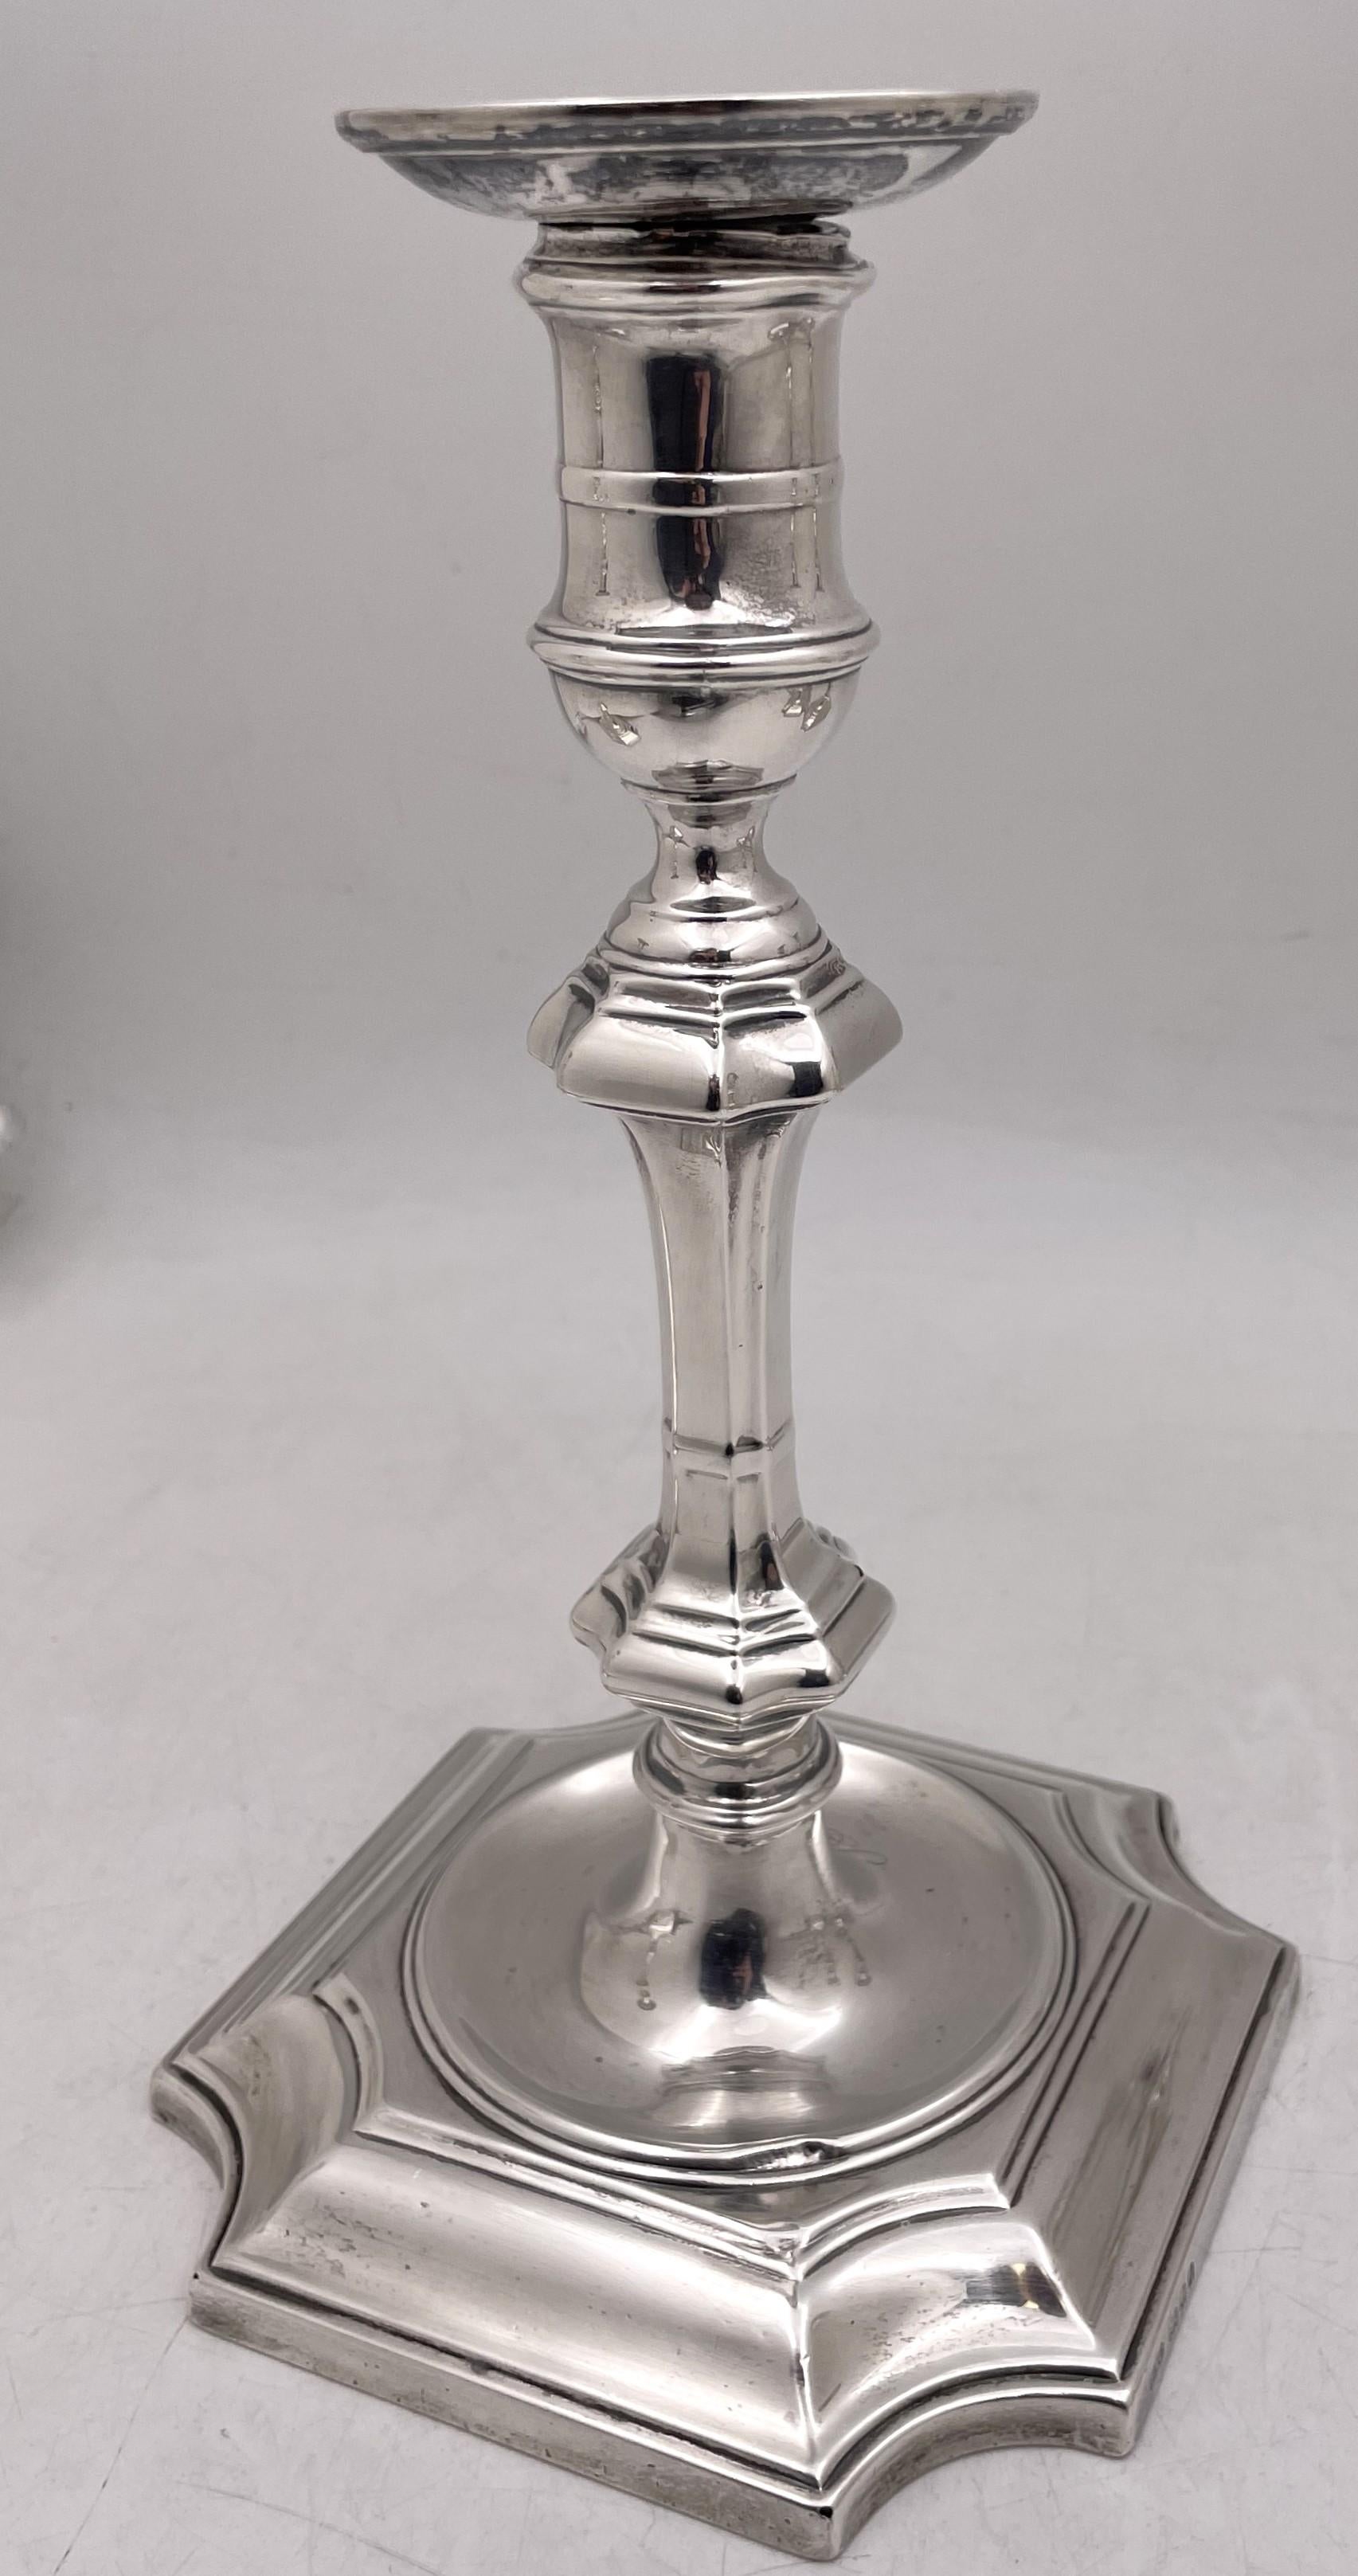 Crichton & Co. Set of 4 English Sterling Silver 1924 Candlesticks Art Deco Style In Good Condition For Sale In New York, NY